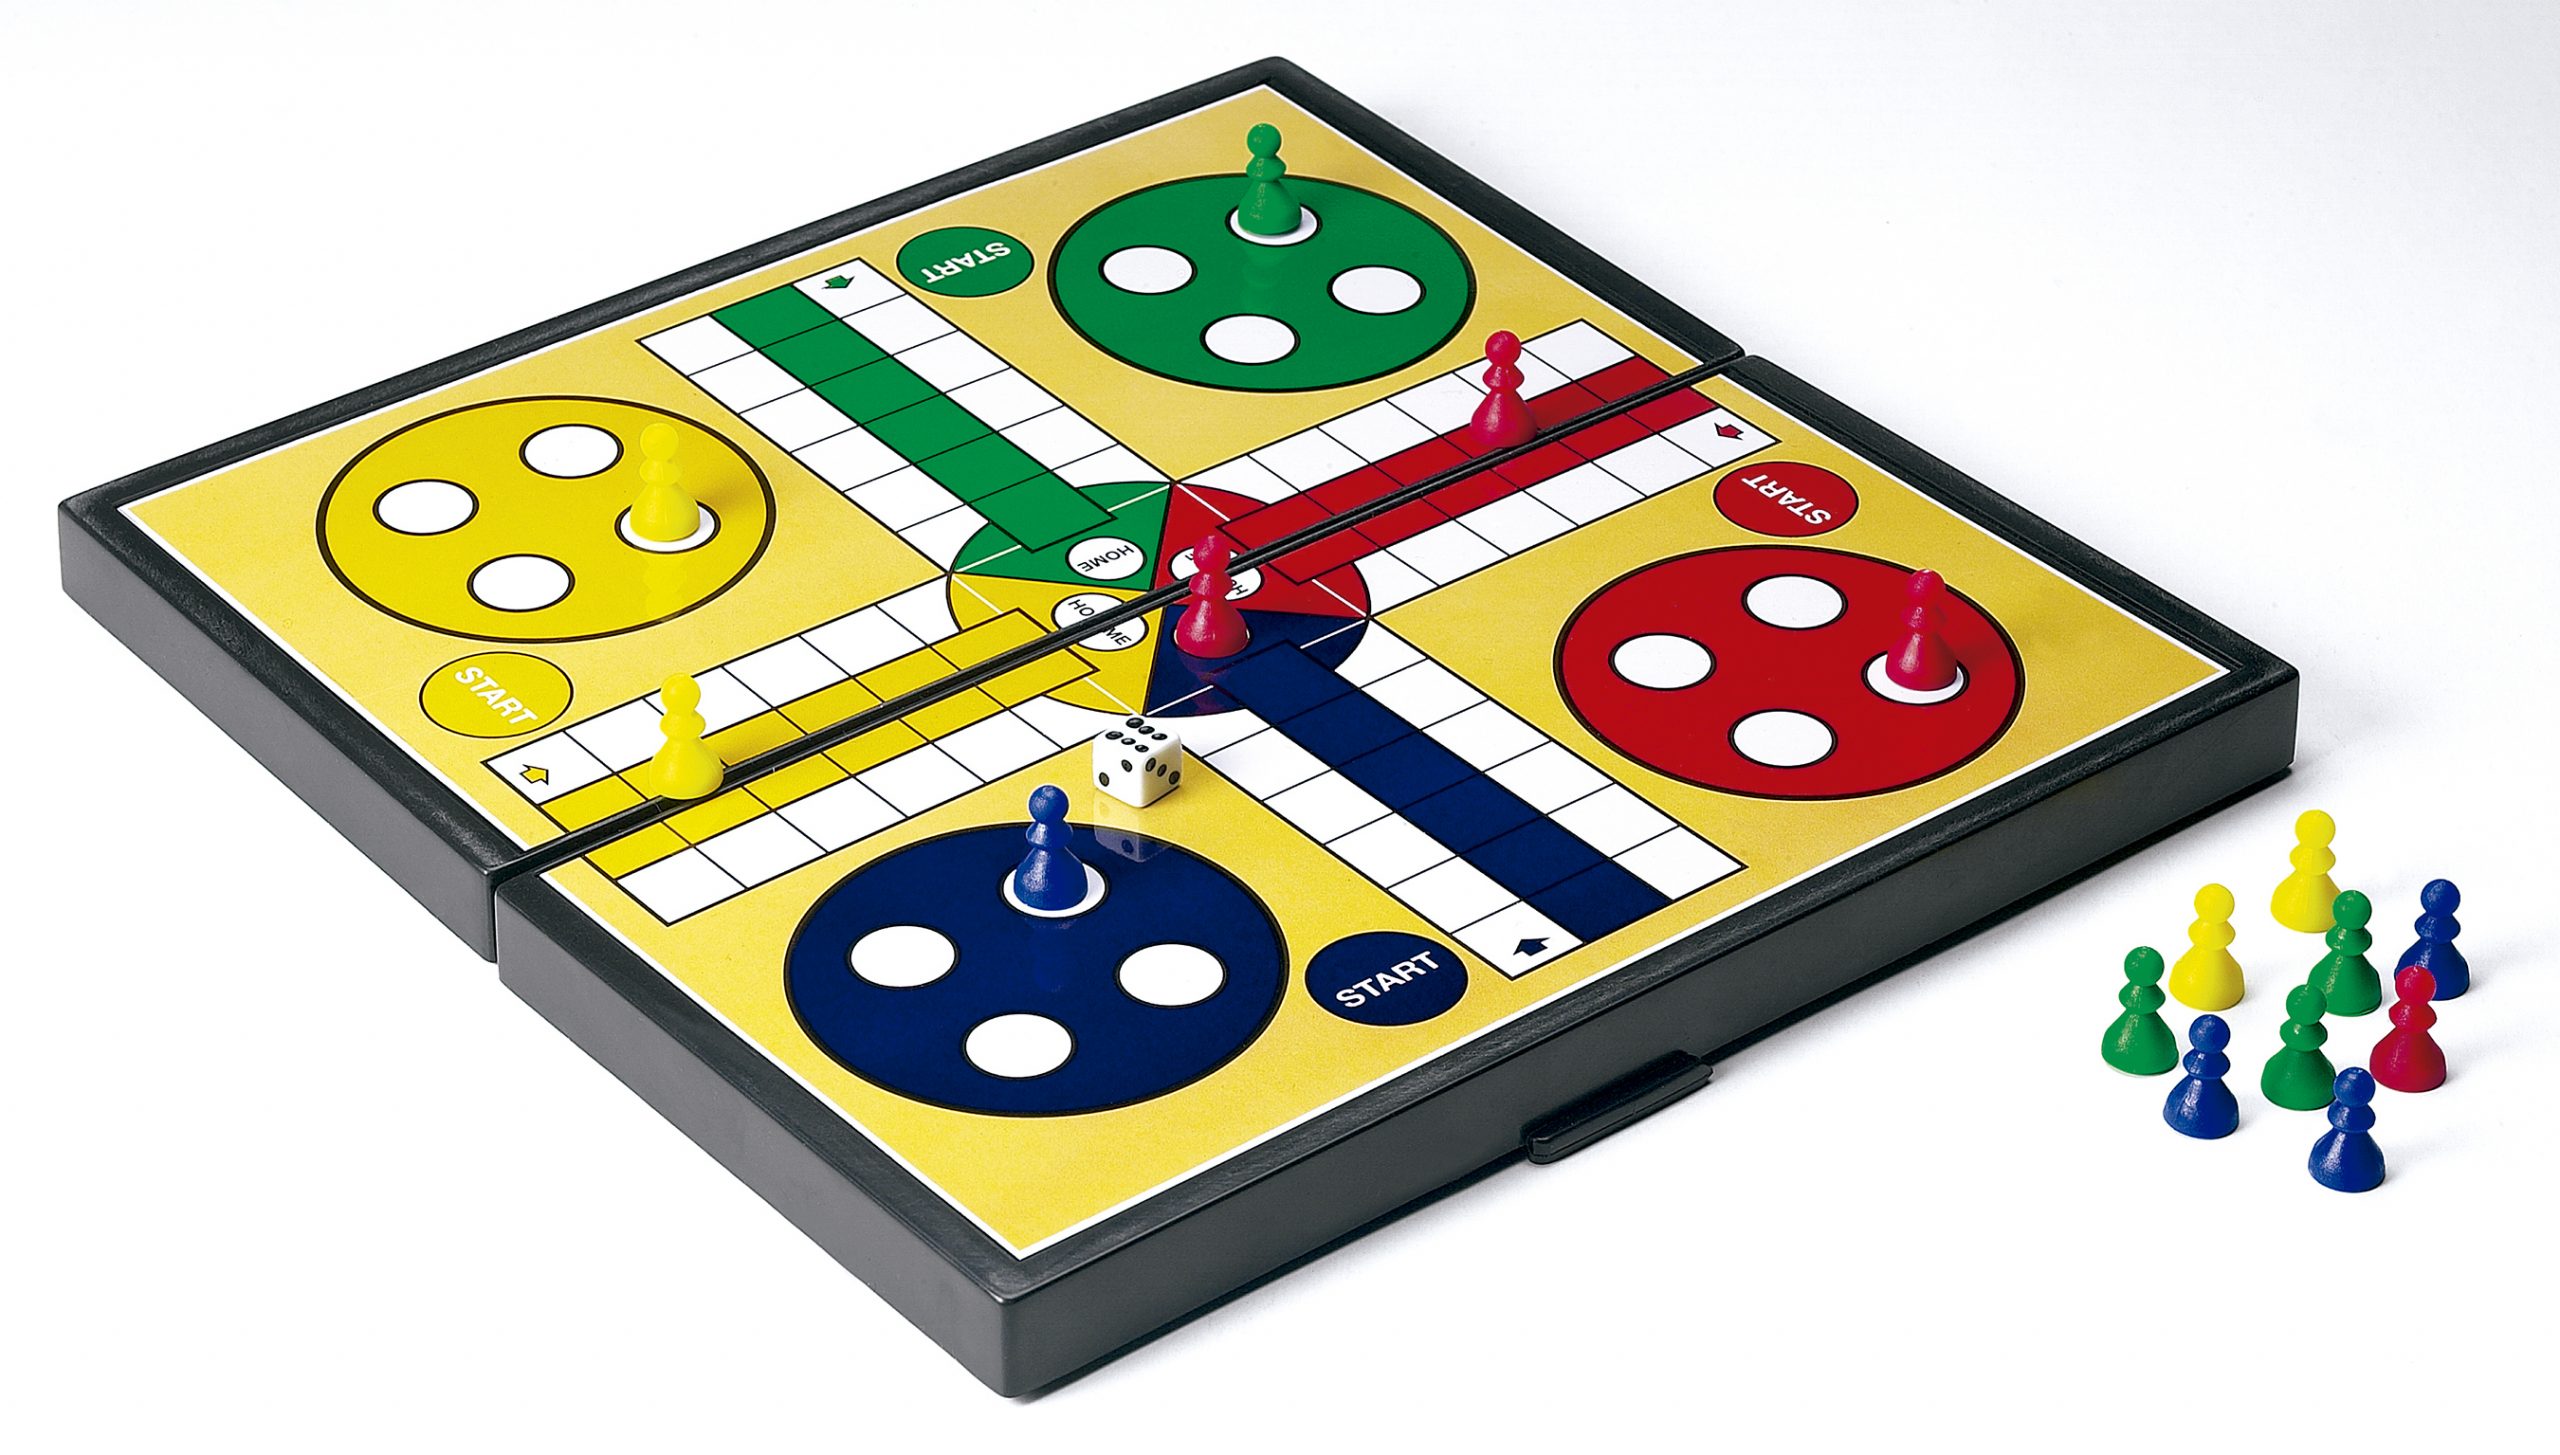 Ludo Online Game - Top Reasons for 90s Kids to Love It!